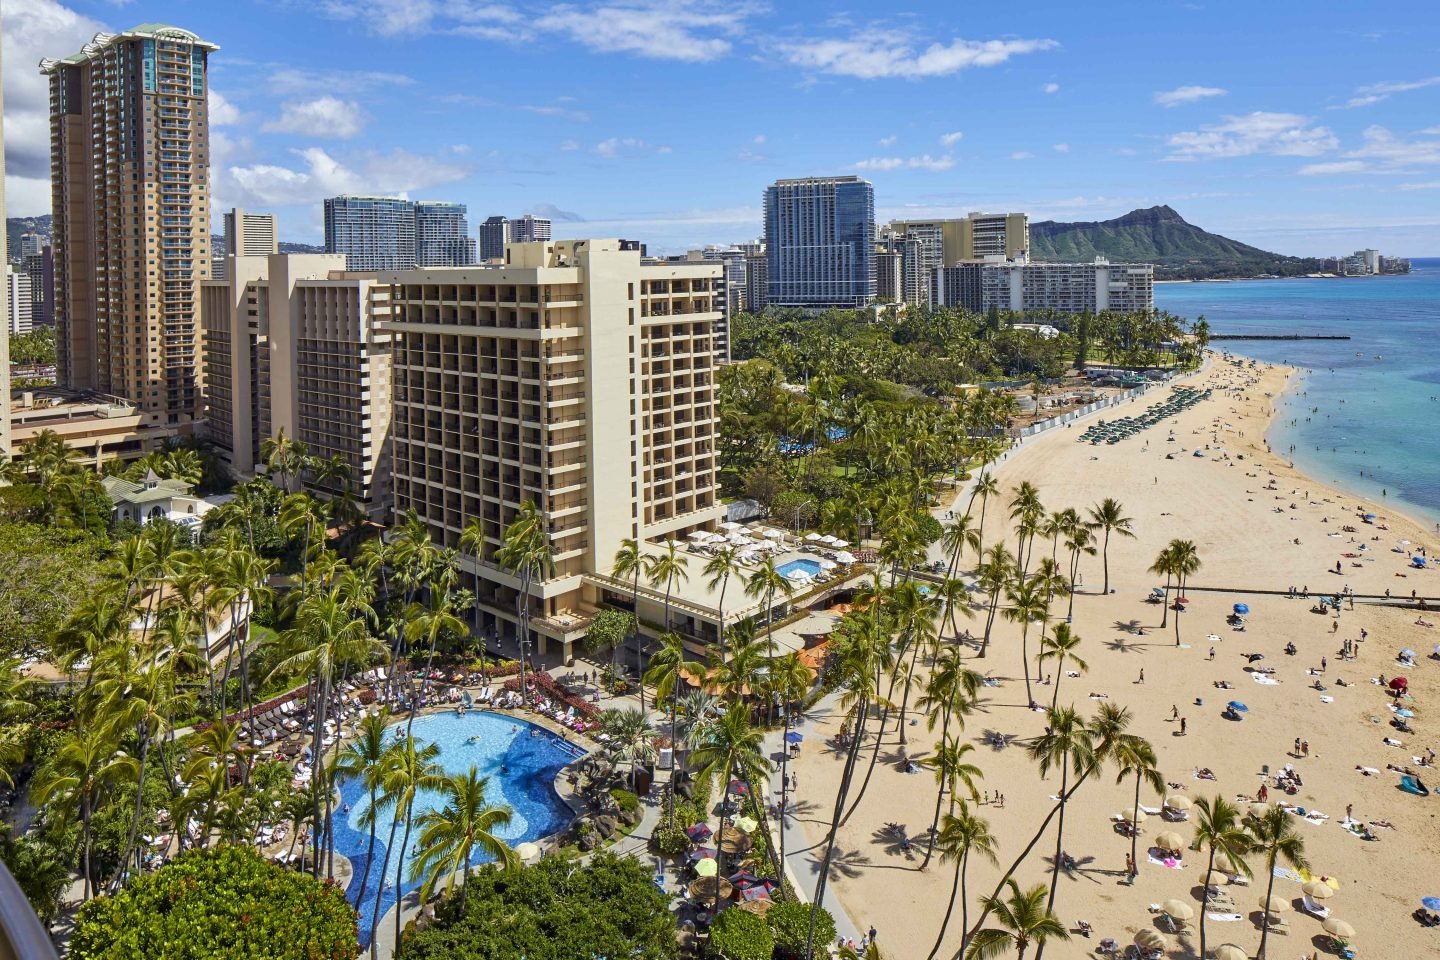 trip to hawaii for two cost